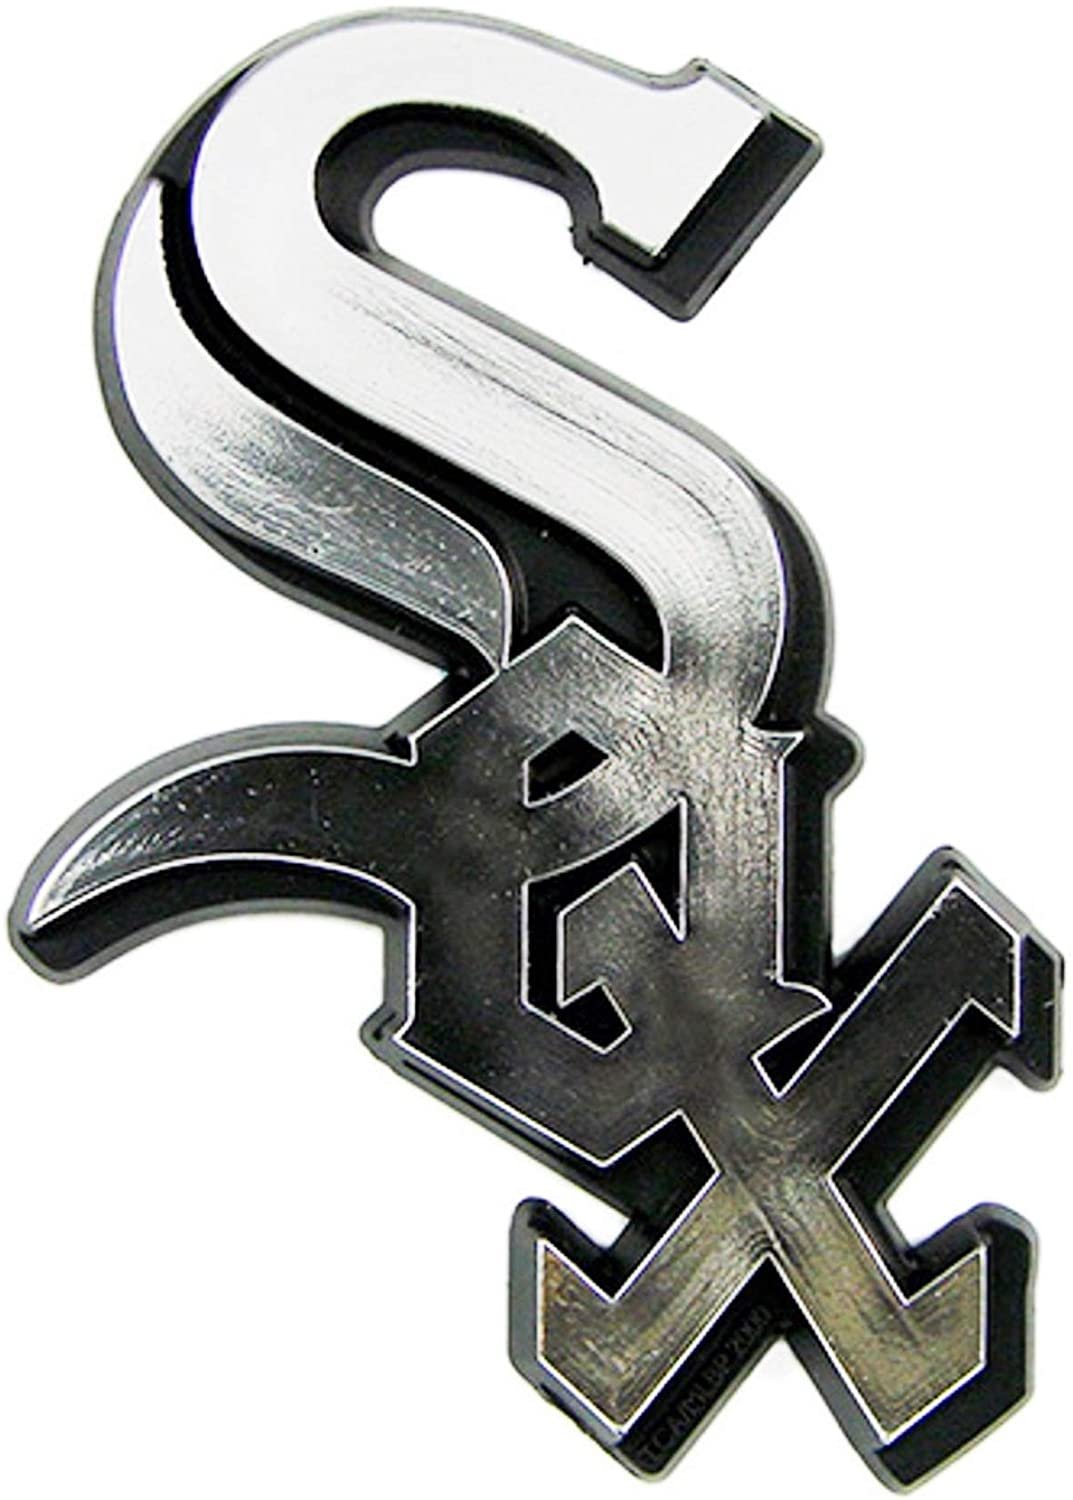 Chicago White Sox Auto Emblem, Plastic Molded, Silver Chrome Color, Raised 3D Effect, Adhesive Backing